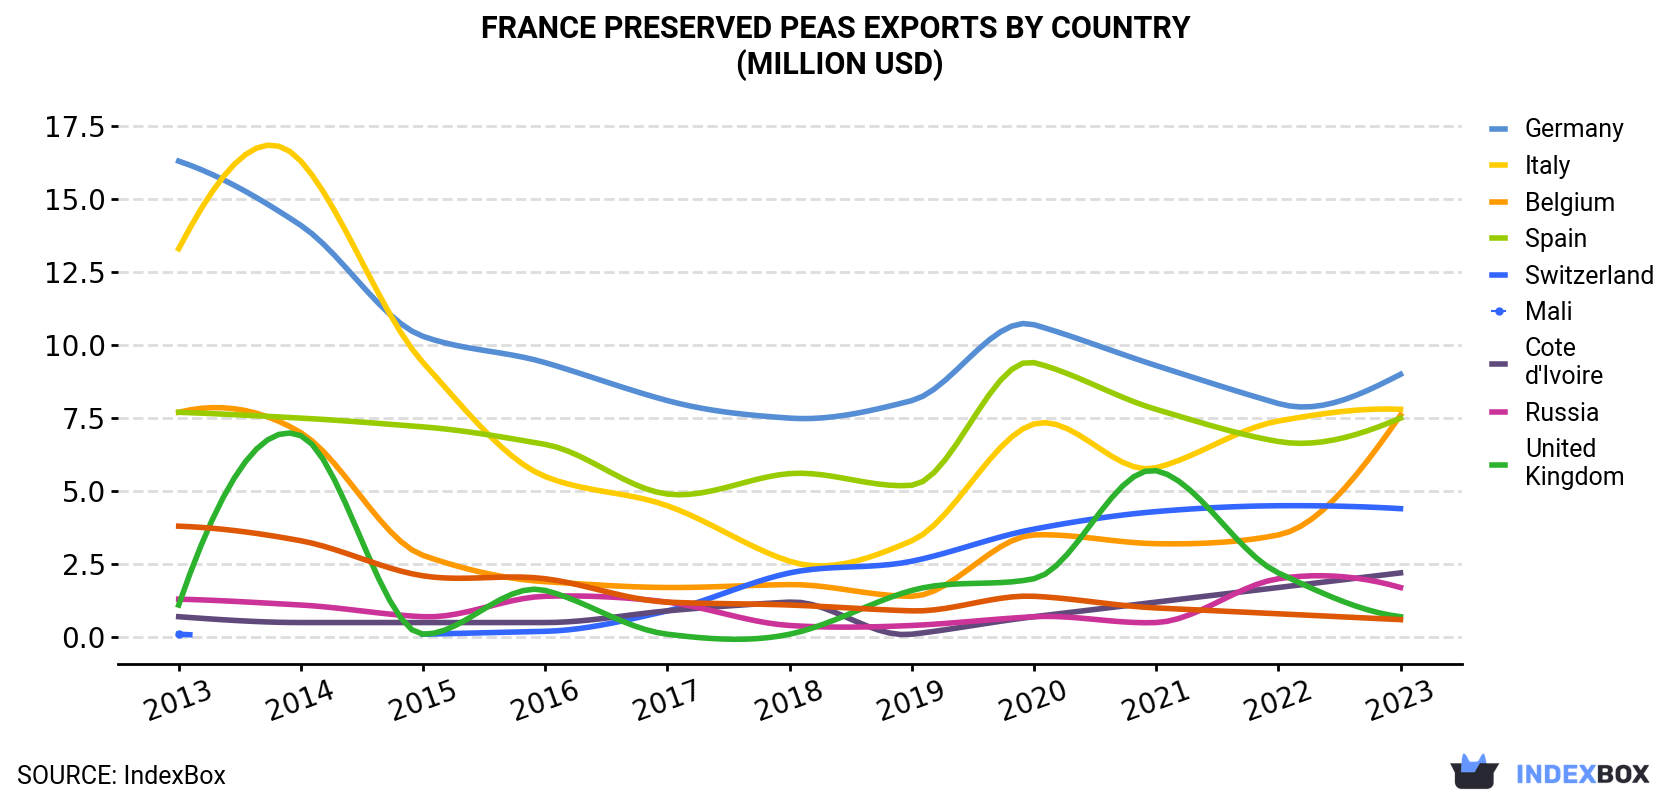 France Preserved Peas Exports By Country (Million USD)